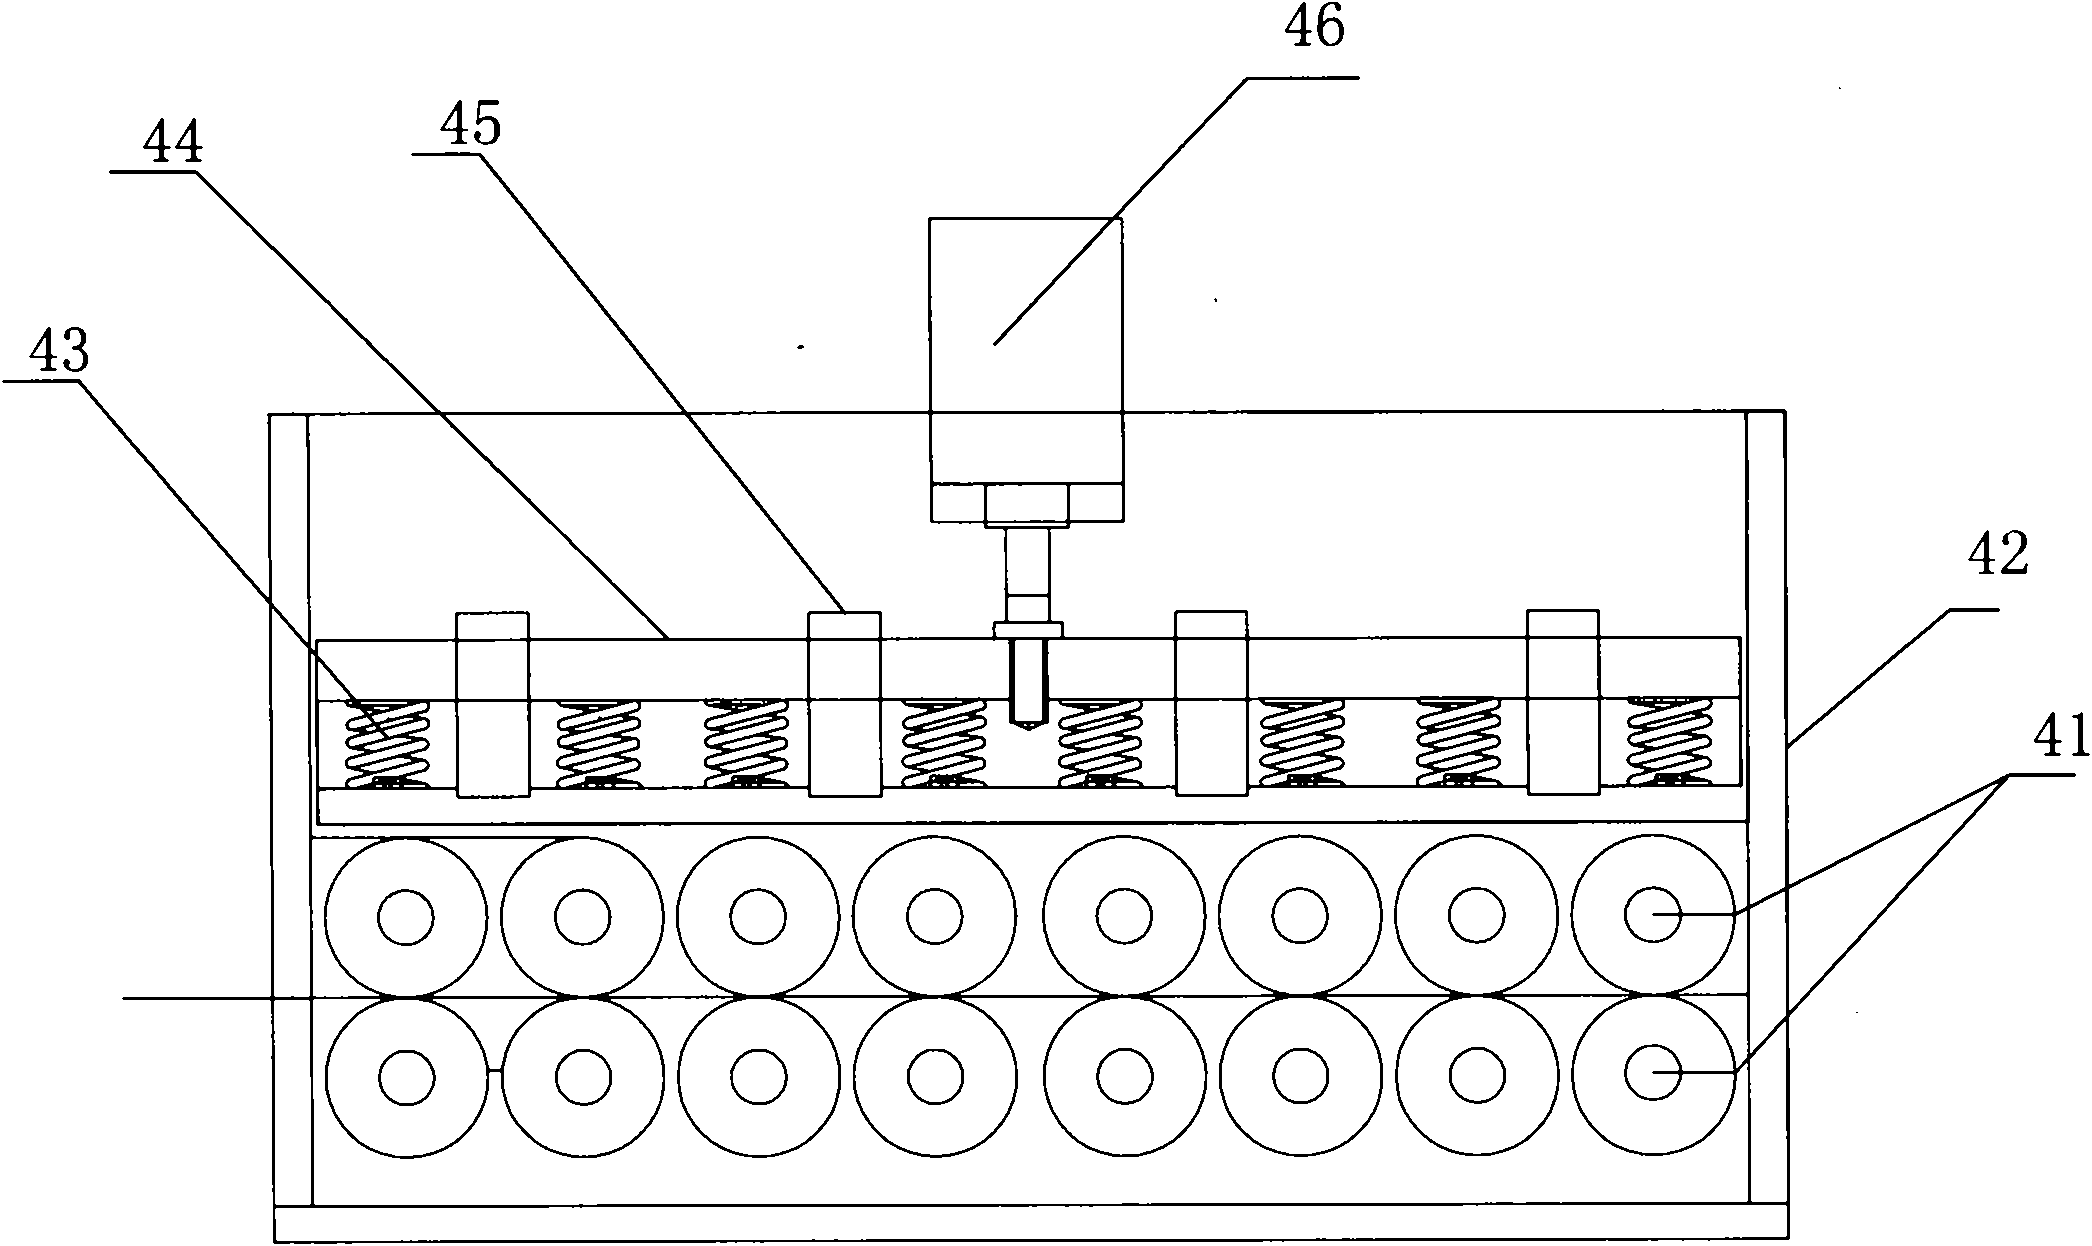 Numerical-control single-plate bilateral synchronous edging machine